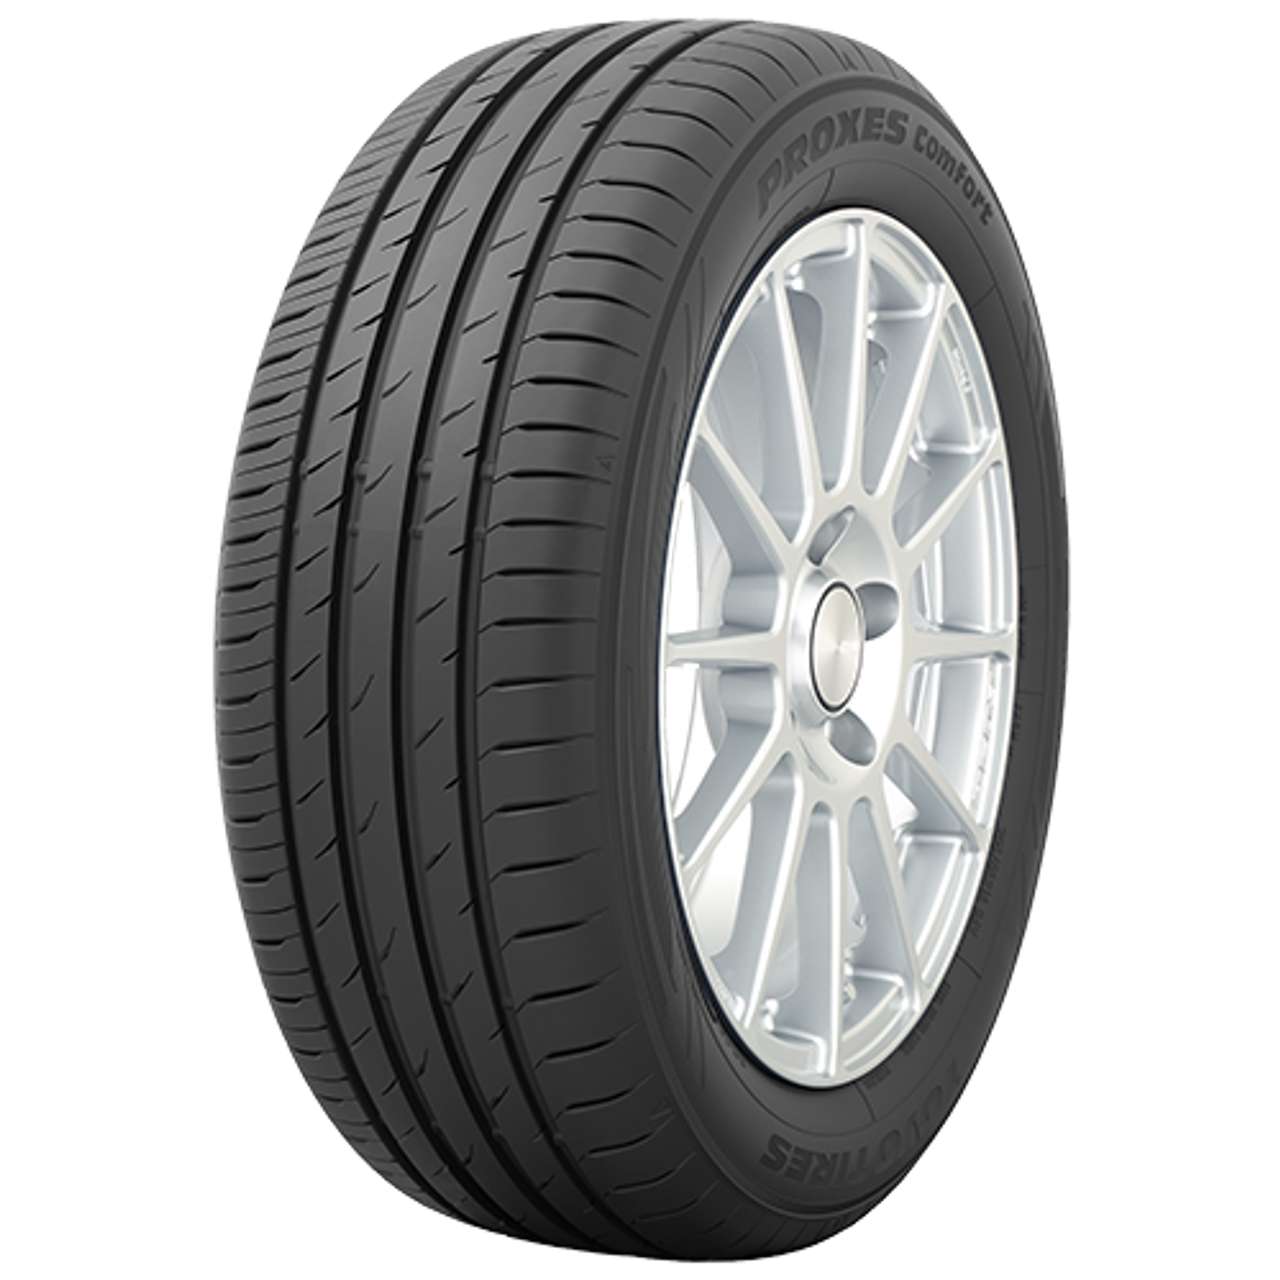 TOYO PROXES COMFORT 215/55R17 98W BSW XL